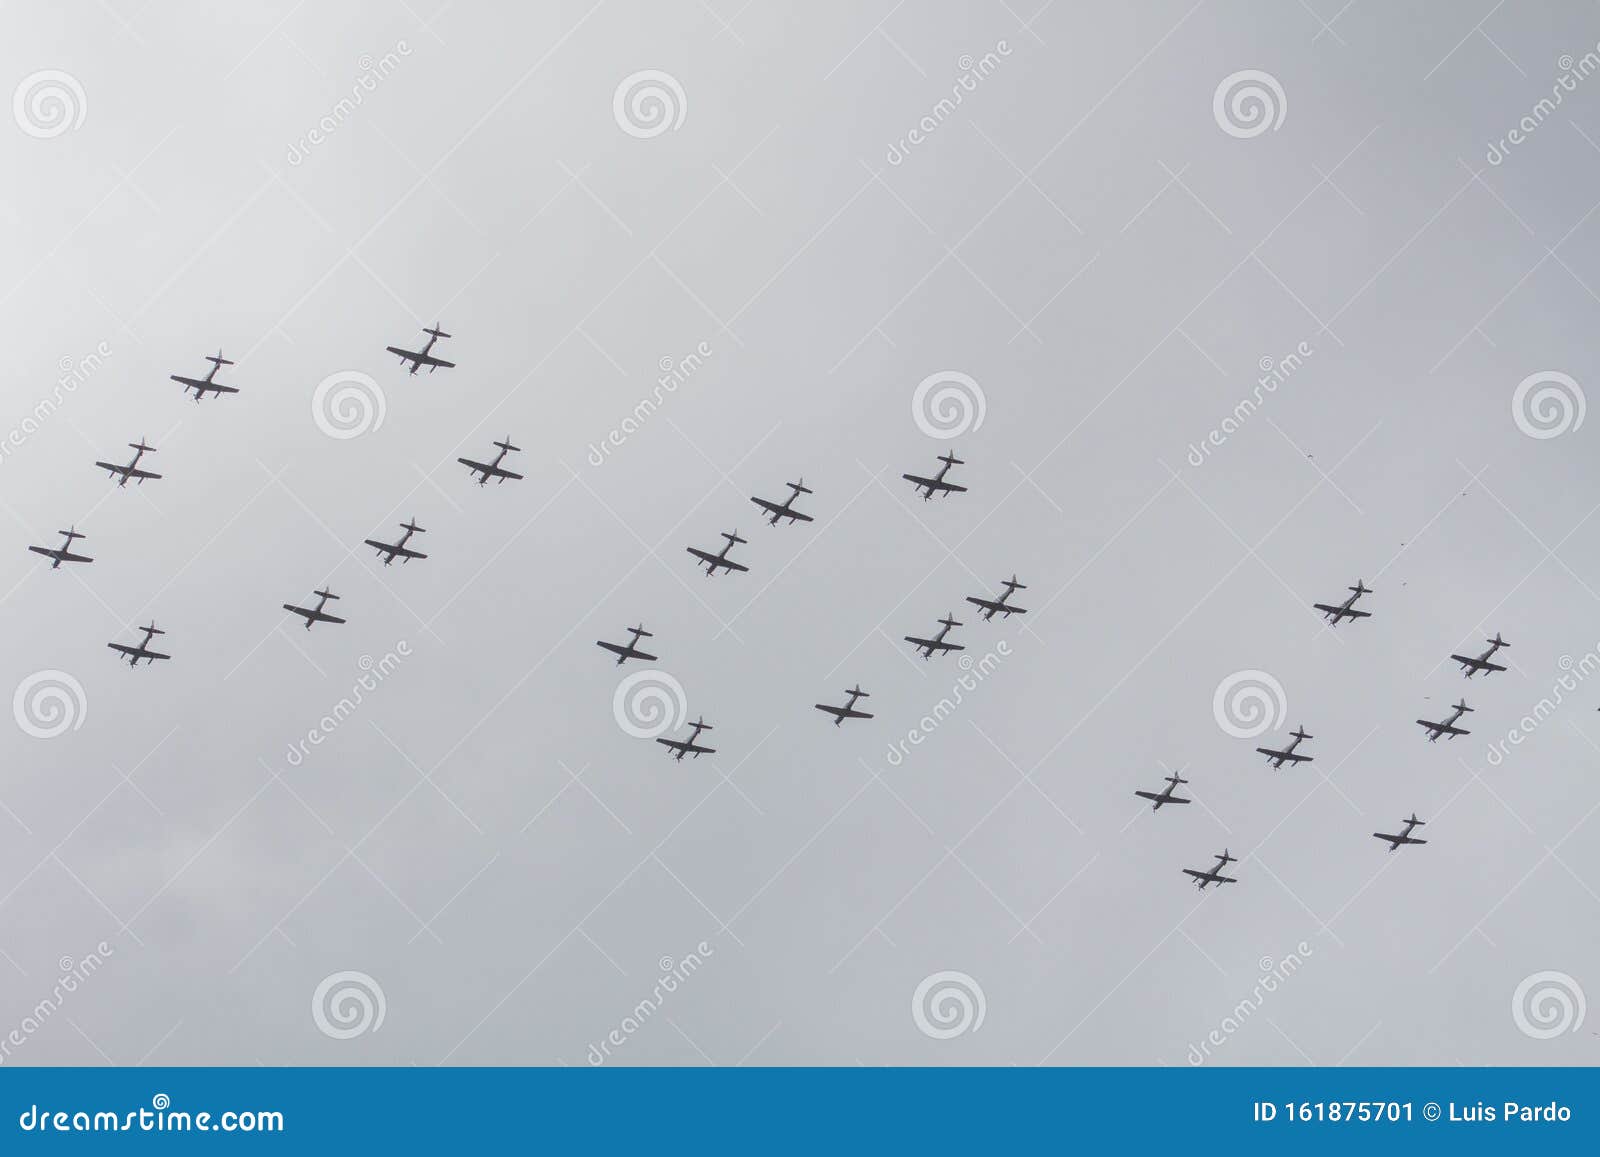 airplanes formation exhibition militar airforce